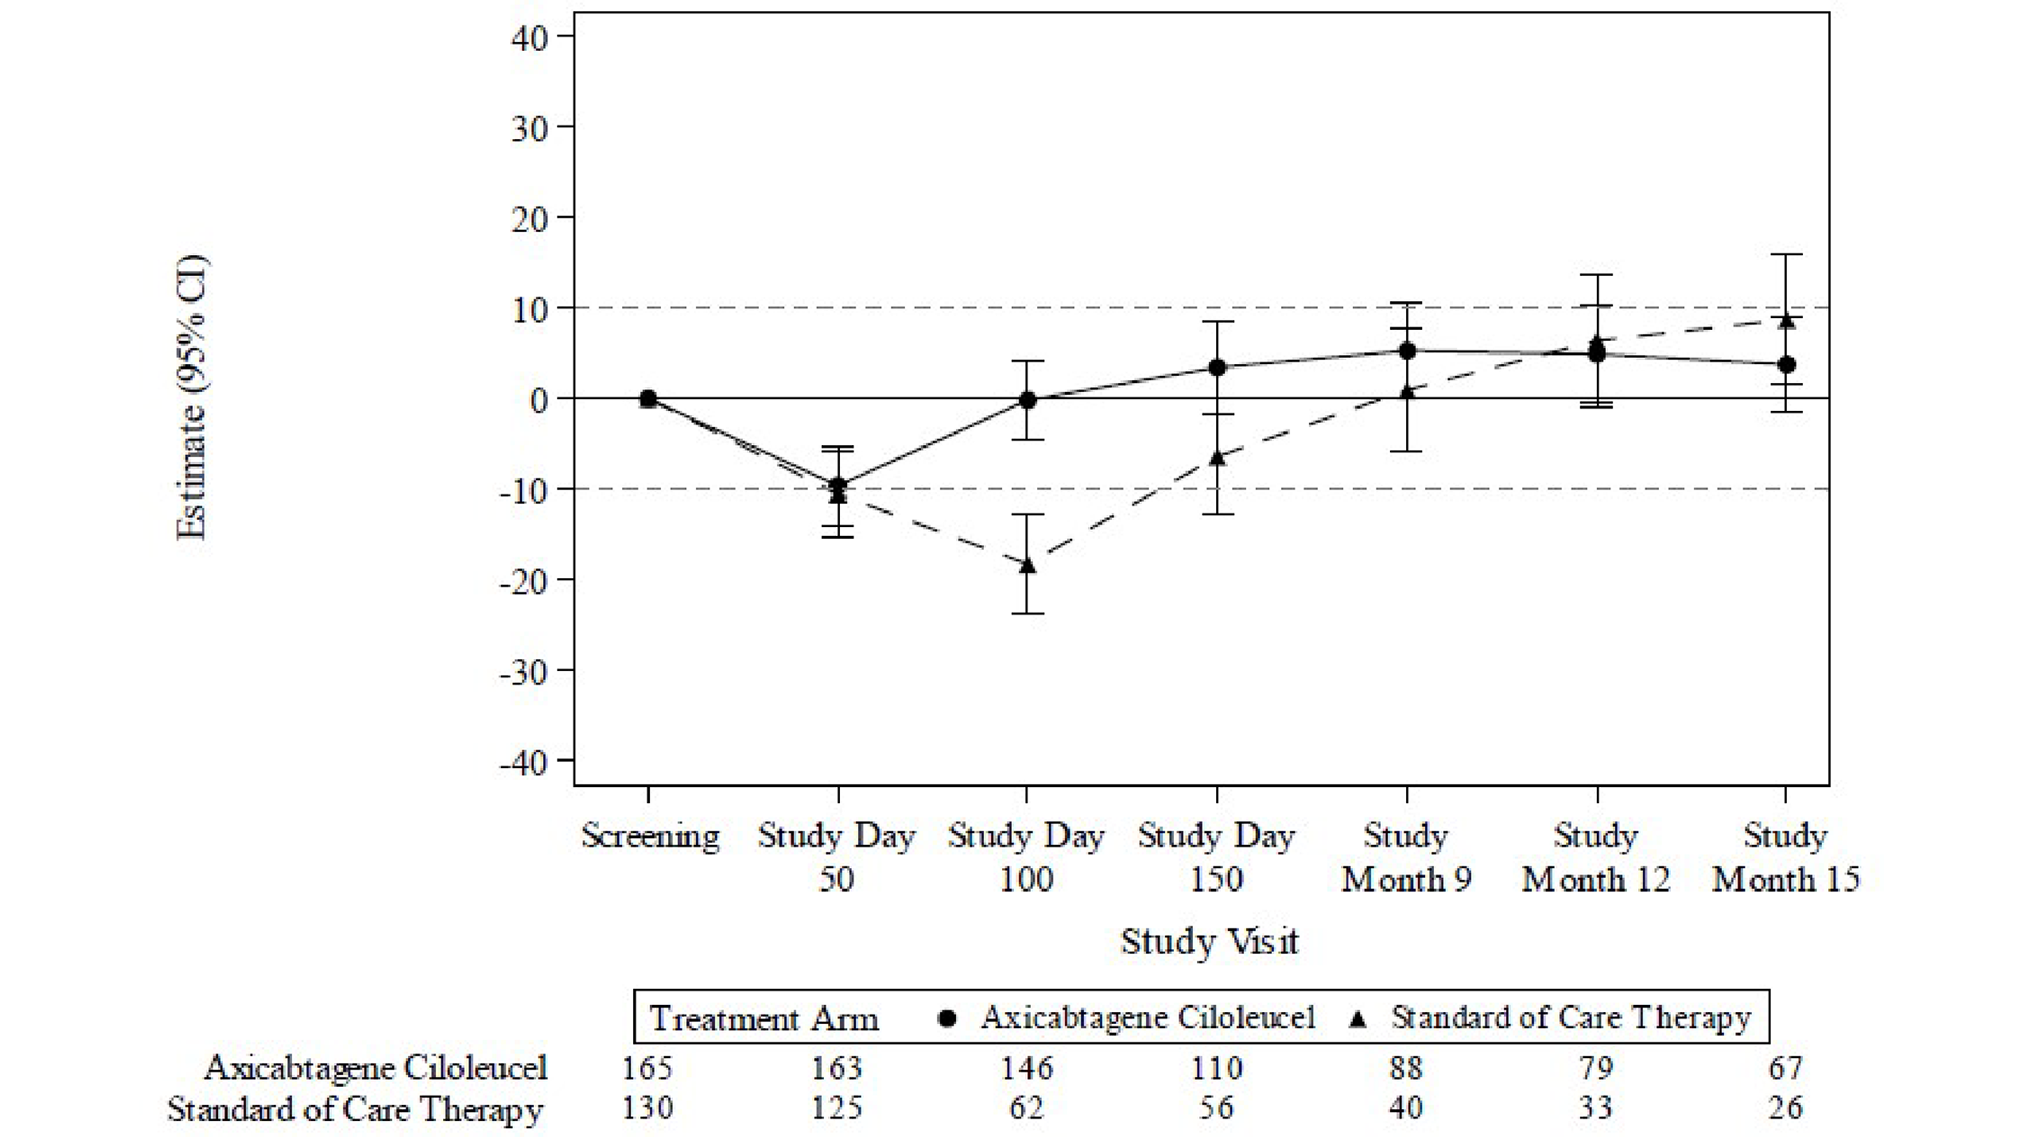 The y-axis is the estimate from –40 to 40; the x-axis is the study visit ranging from screening to study month 15. Points with bars depicting the 95% CI are shown at each study visit with lines connecting them. The estimates for both groups are 0 at the screening visit and –10 at the study day 50 visit. For the axi-cel arm, the estimate is then 0 at study day 100 then above 0 but less than 10 for all subsequent visits. For the SOC arm, the estimate is –20 at study day 100, then increases at each visit crossing 0 at study month 9. The estimates overlap at study month 12 then is higher for the SOC arm at study month 15.